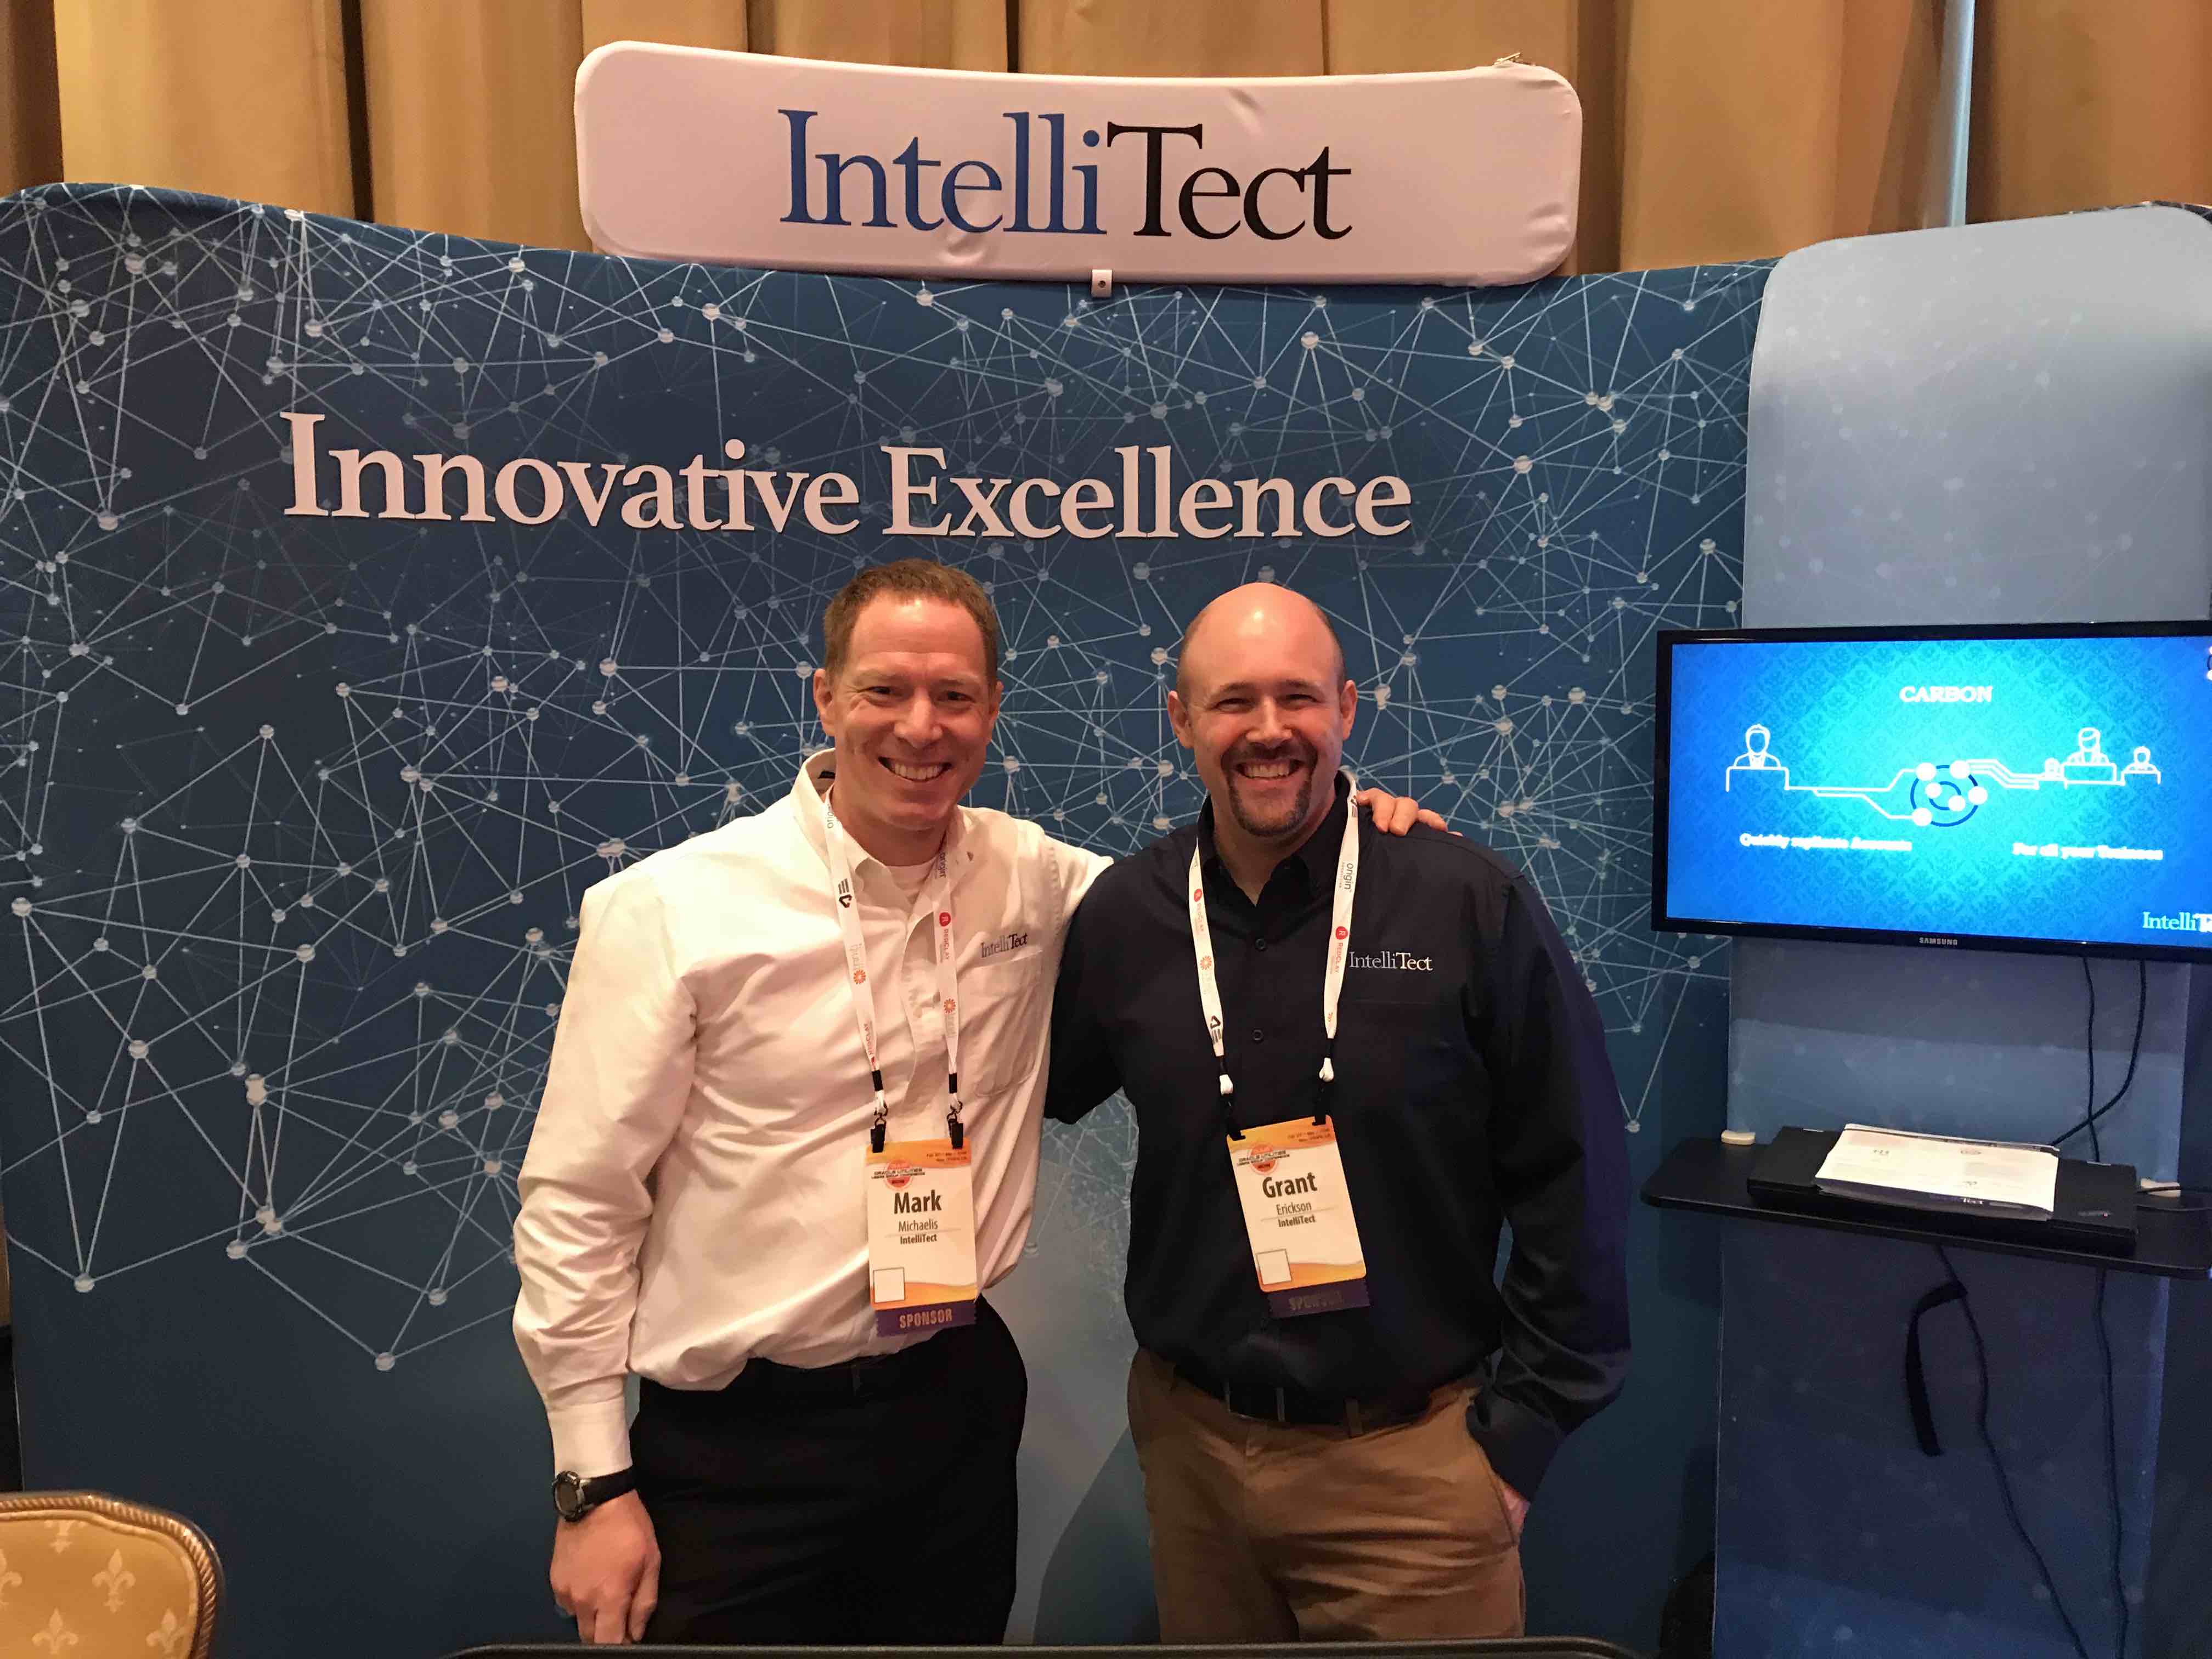 Mark Micahelis and Grant in front of an IntelliTect sign